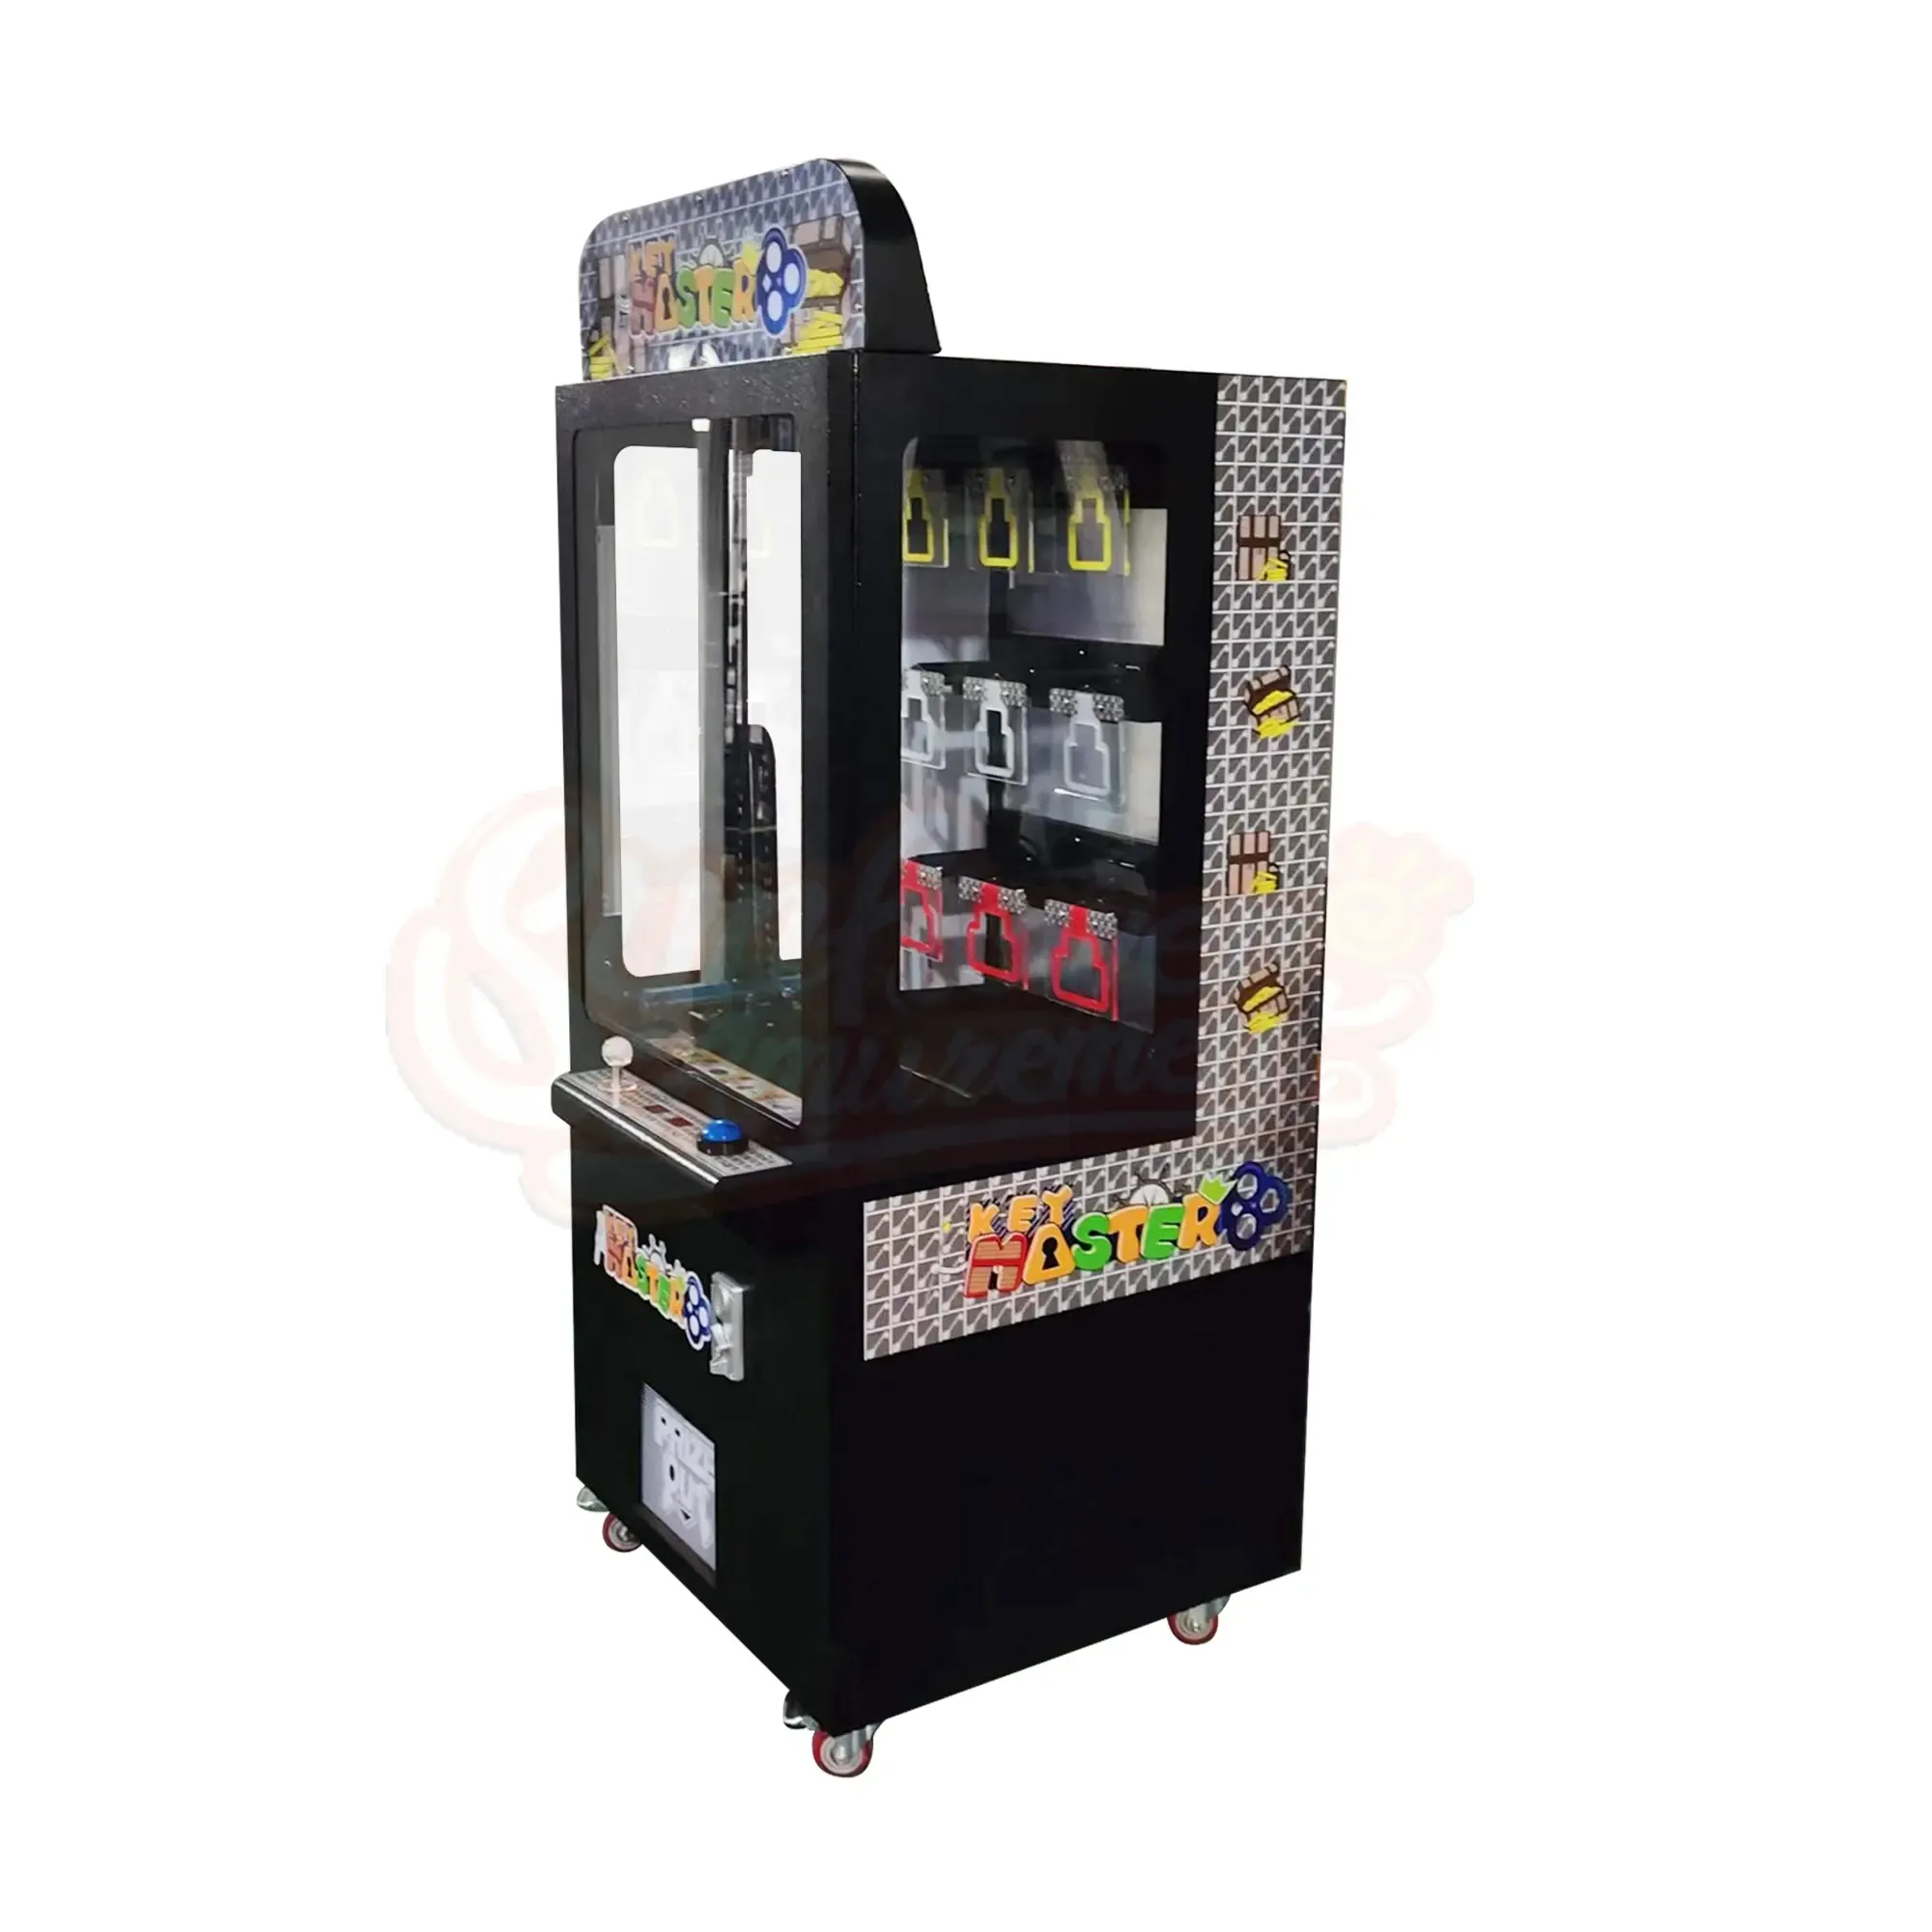 catch your own prize plush gift Vending Claw Game Machine Key Master joystick knock off the key Arcade Key Master Game Machine